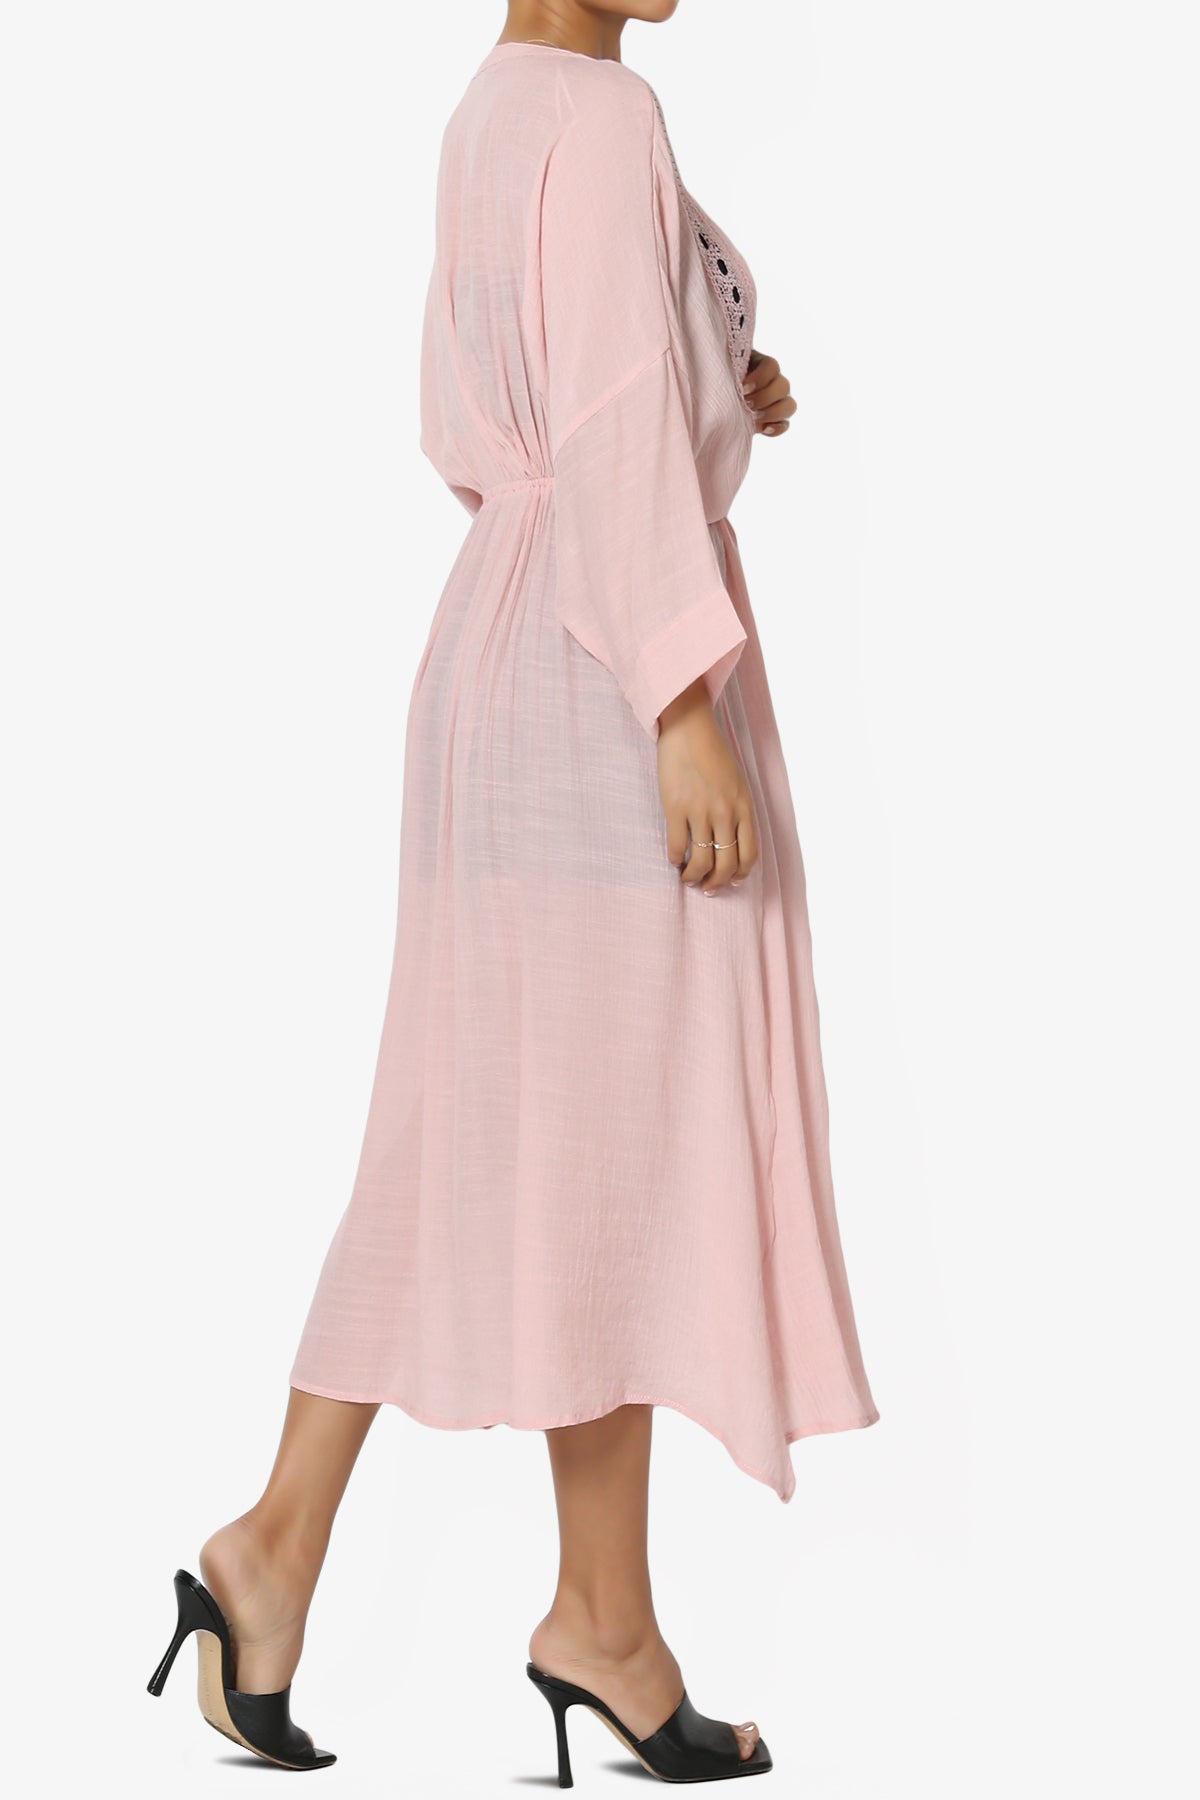 Load image into Gallery viewer, Sunlace Lace Trim High Slit Caftan PINK_4
